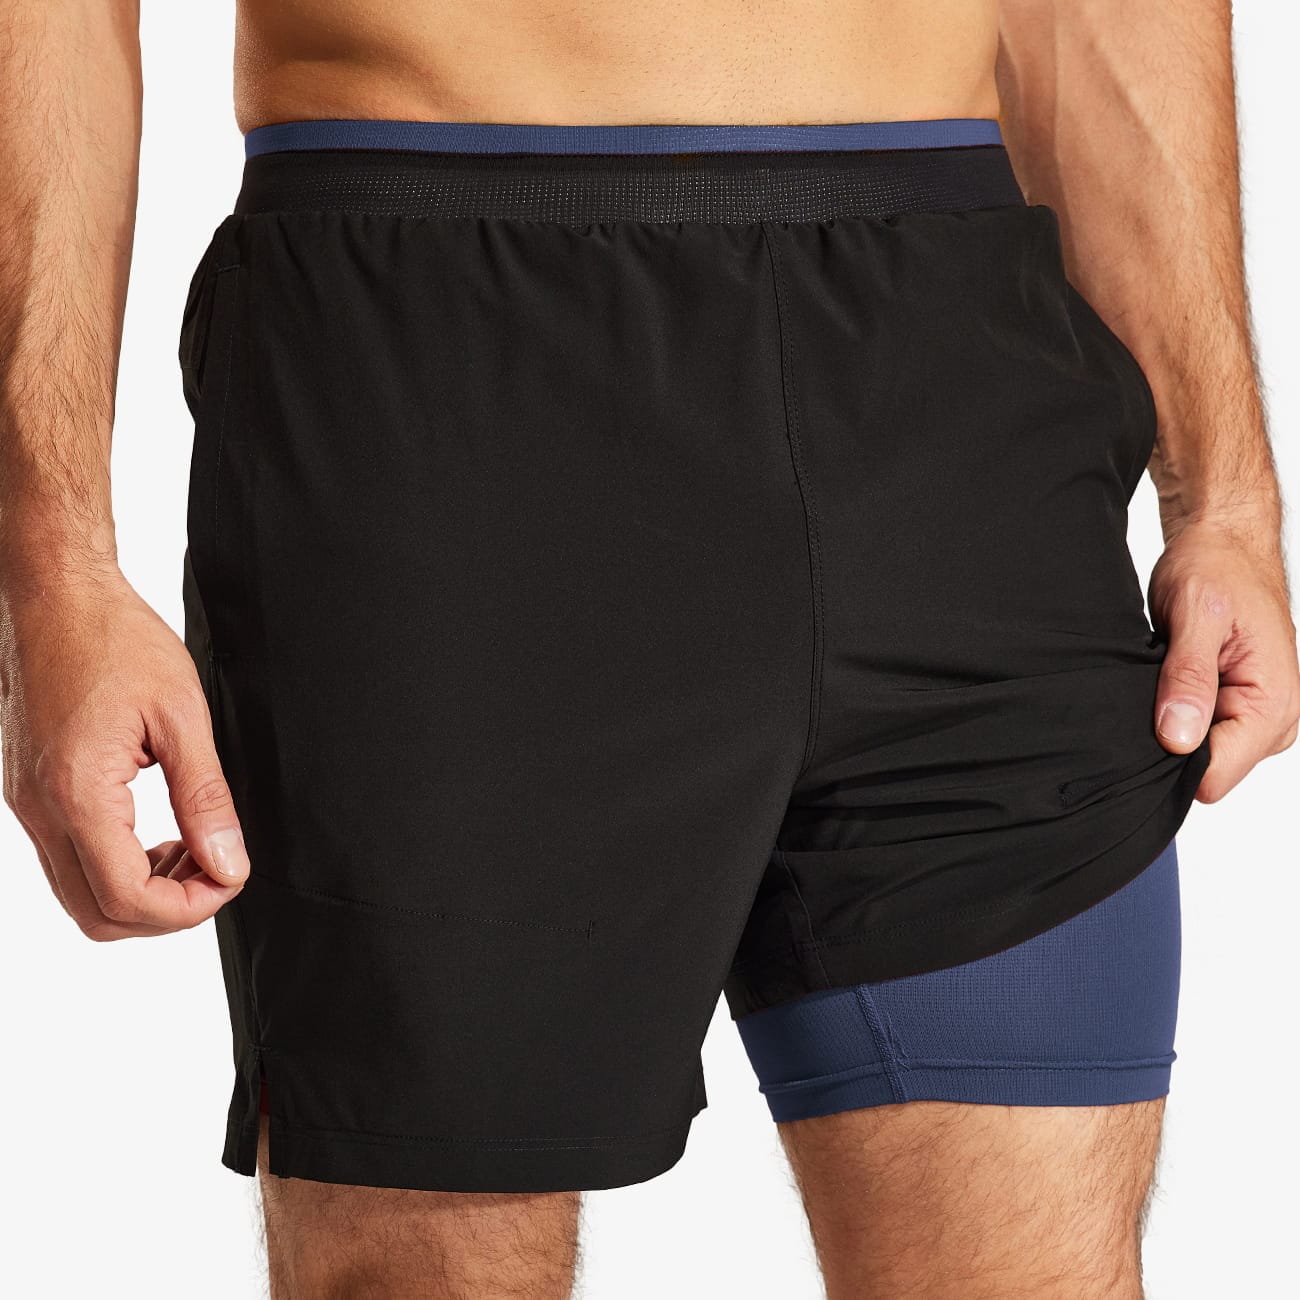 https://www.miersports.com/cdn/shop/files/men-s-2-in-1-running-shorts-with-liner-5-quick-dry-athletic-shorts-black-blue-s-mier-31358333419654.jpg?v=1692089253